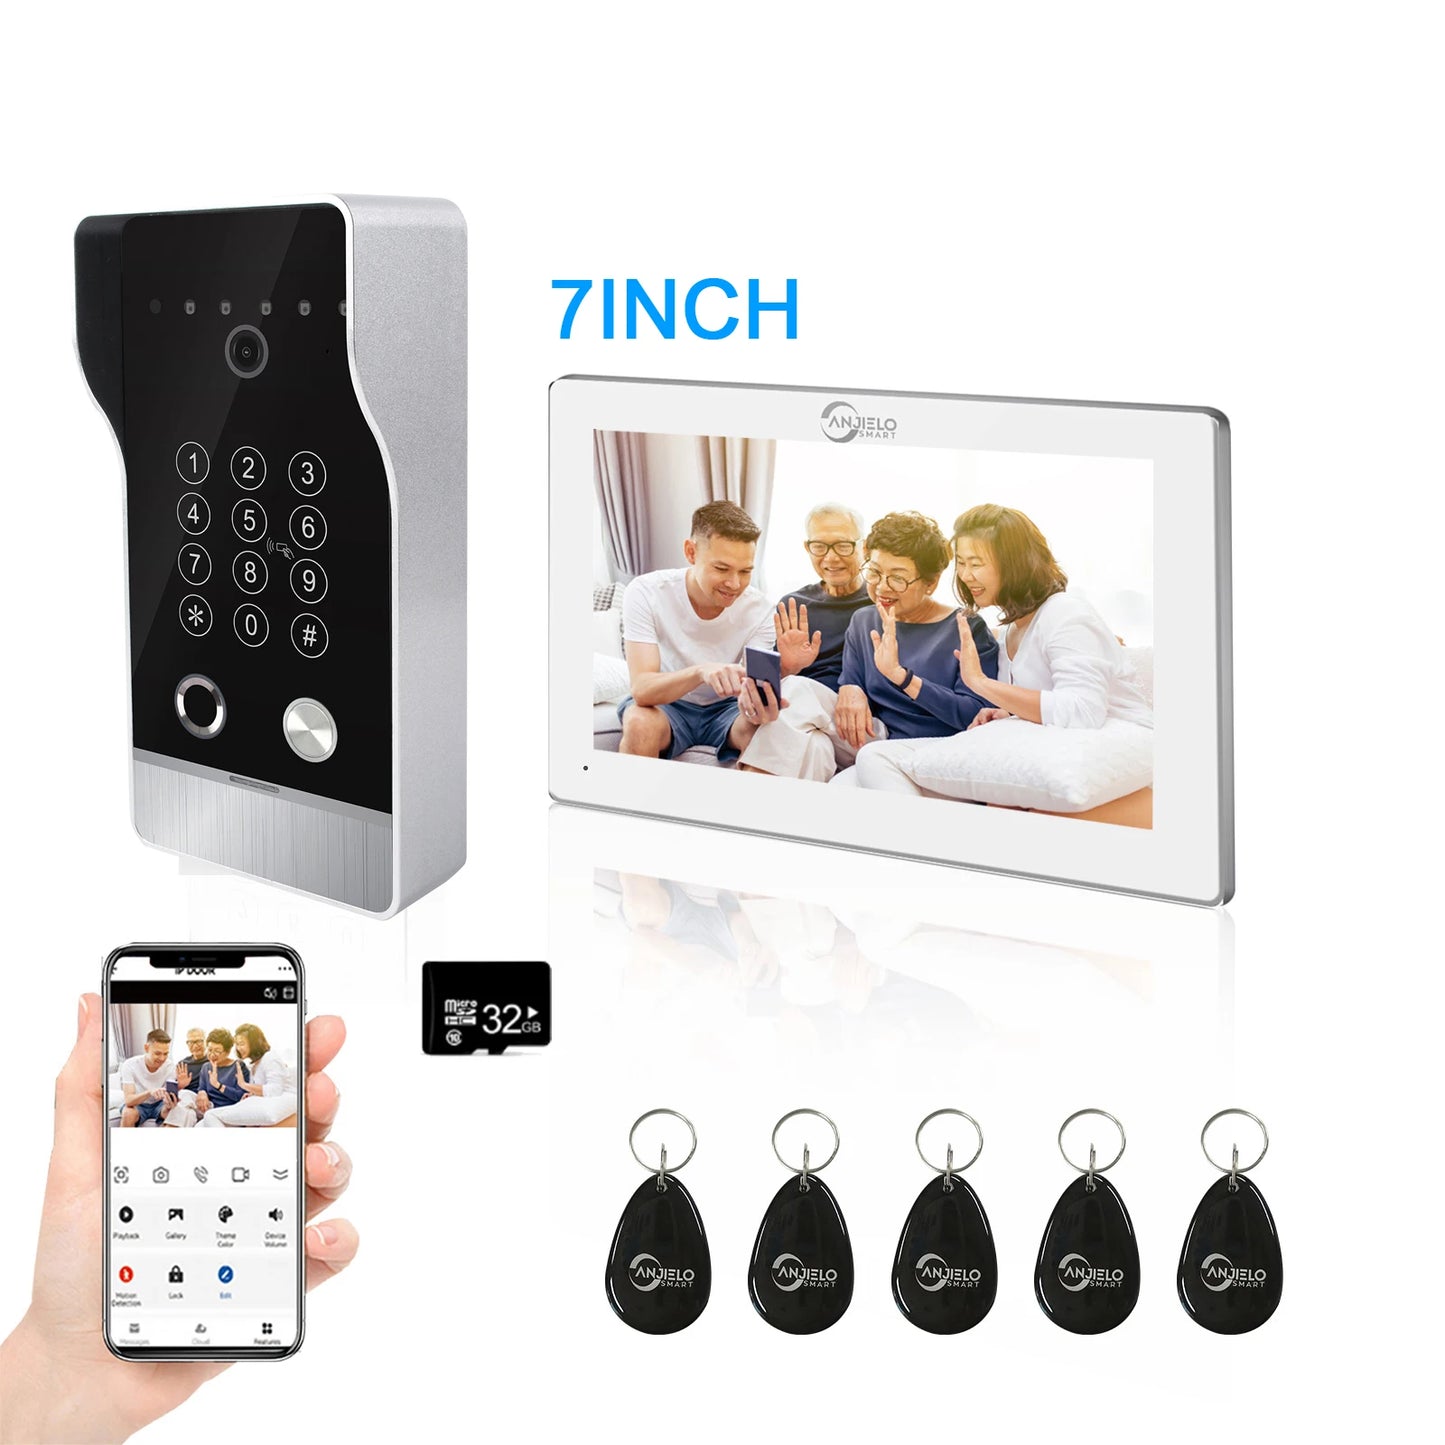 NEW 2023 Large Size FHD 1080P Tuya Smart WiF Video Door phone Doorbell Camera with RFID Card unlcok Fingerprint and Passcode unlock for the Apartment Intercom System for Home Villa